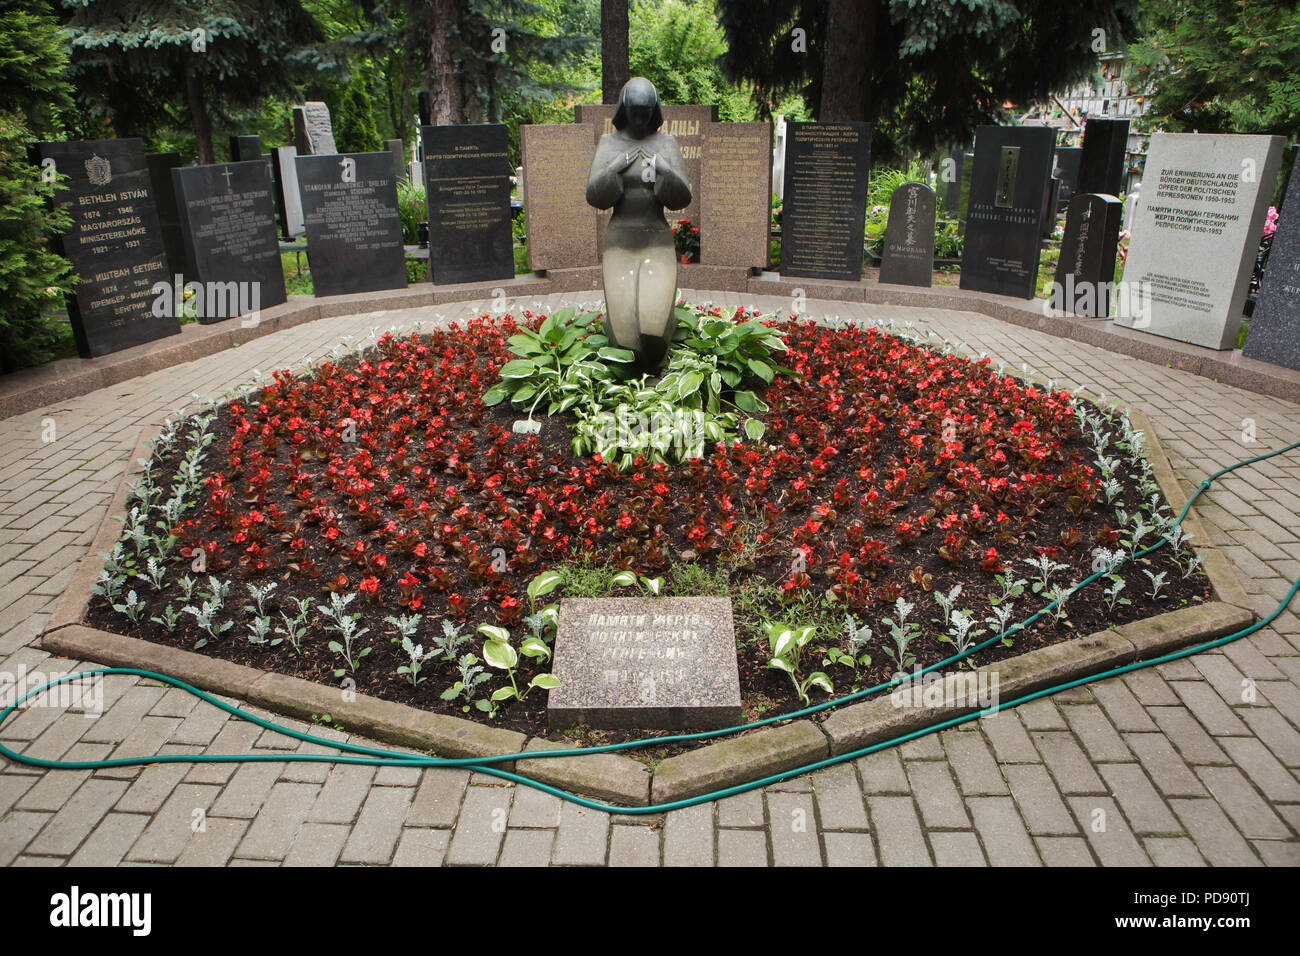 Communal grave of unclaimed ashes number three, where people executed by the NKVD were secretly buried from 1945 to 1953, at the Donskoye Cemetery in Moscow, Russia. It is believed the mass grave contains the remains of the members of the Jewish Anti-Fascist Committee, Japanese prisoners of war, Cossack atamans Pyotr Krasnov and Andrei Shkuro, as well of the remains of the military leaders of the Russian Liberation Army (ROA) during World War II, include generals Andrey Vlasov, Fyodor Truhin and Sergei Bunyachenko executed in 1946. Remains of the notorious chief of the Soviet secret police Lav Stock Photo